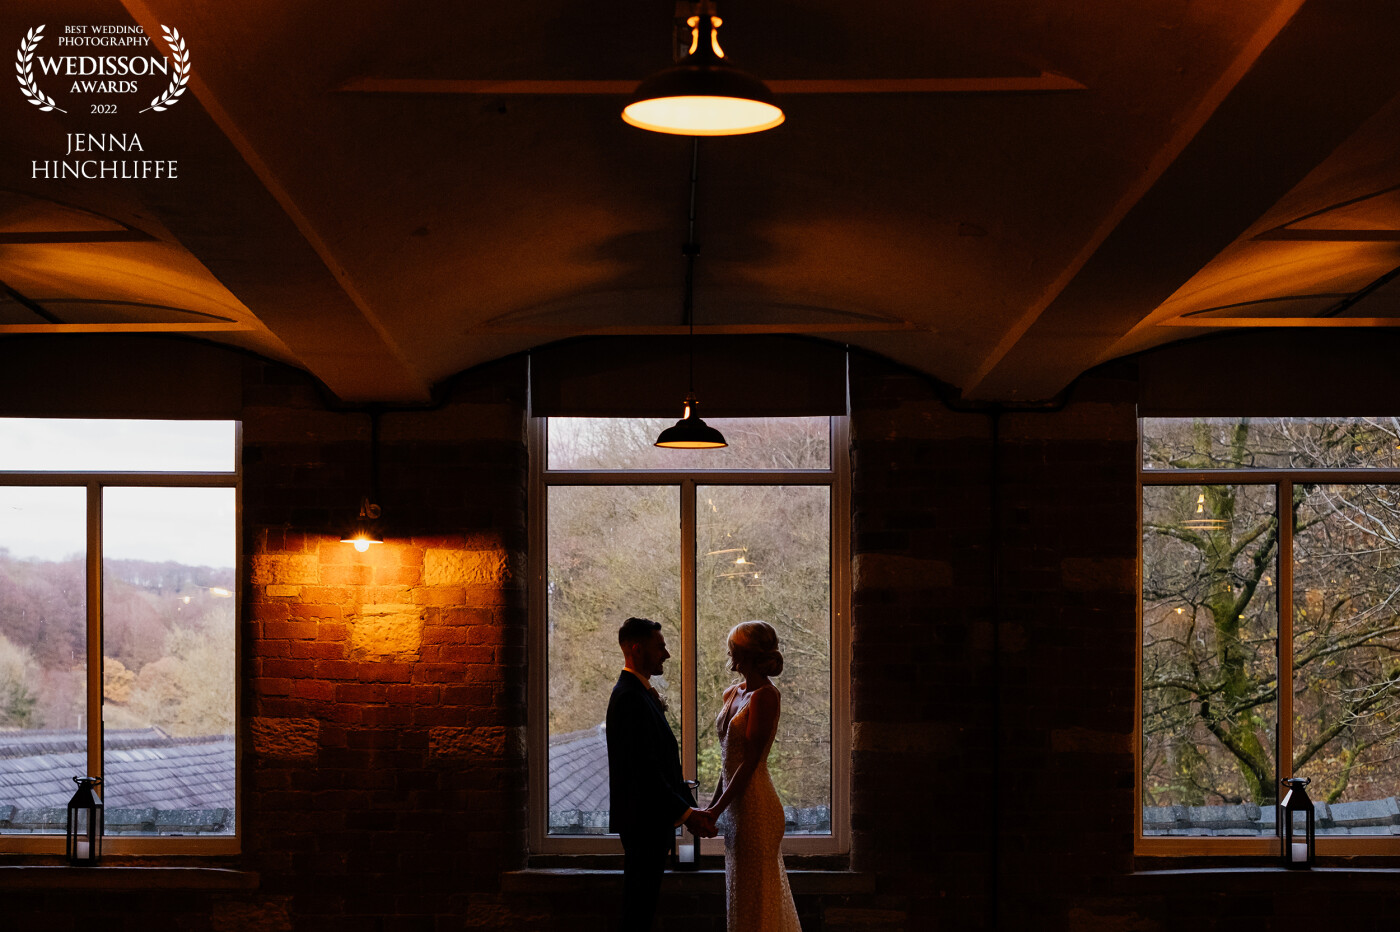 I wanted to show off the beautiful features of mill wedding venue so I silhouetted them against the window so they'd stand out more. I love the asymmetry of the wall light on the left too as it gives the photo a bit of character with its imperfect-ness!